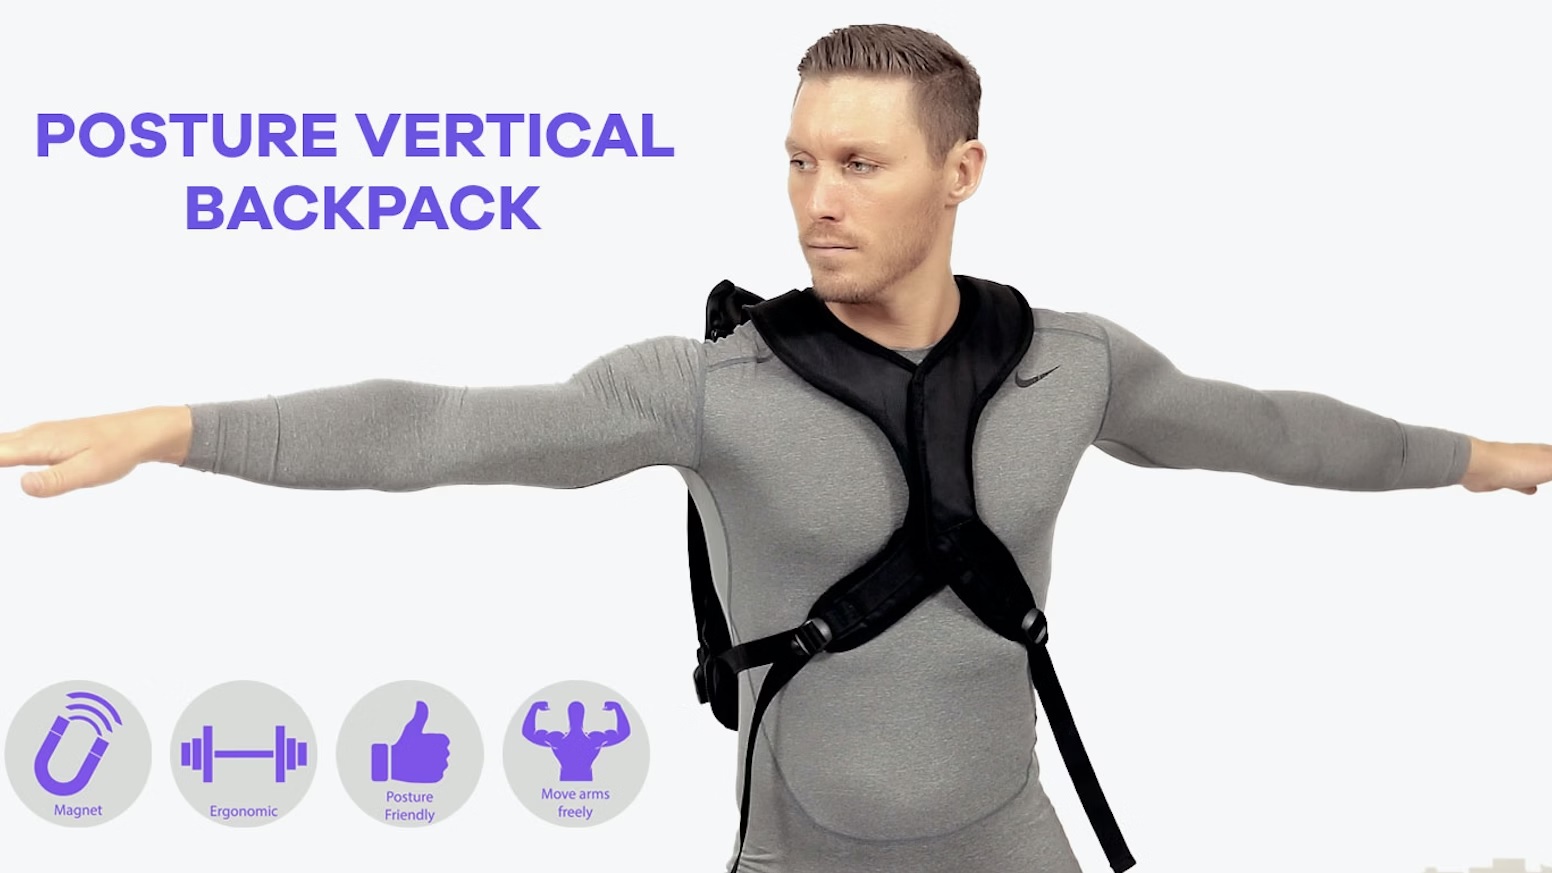 Best Backpack for Posture: From Spinal Health to Comforting Style